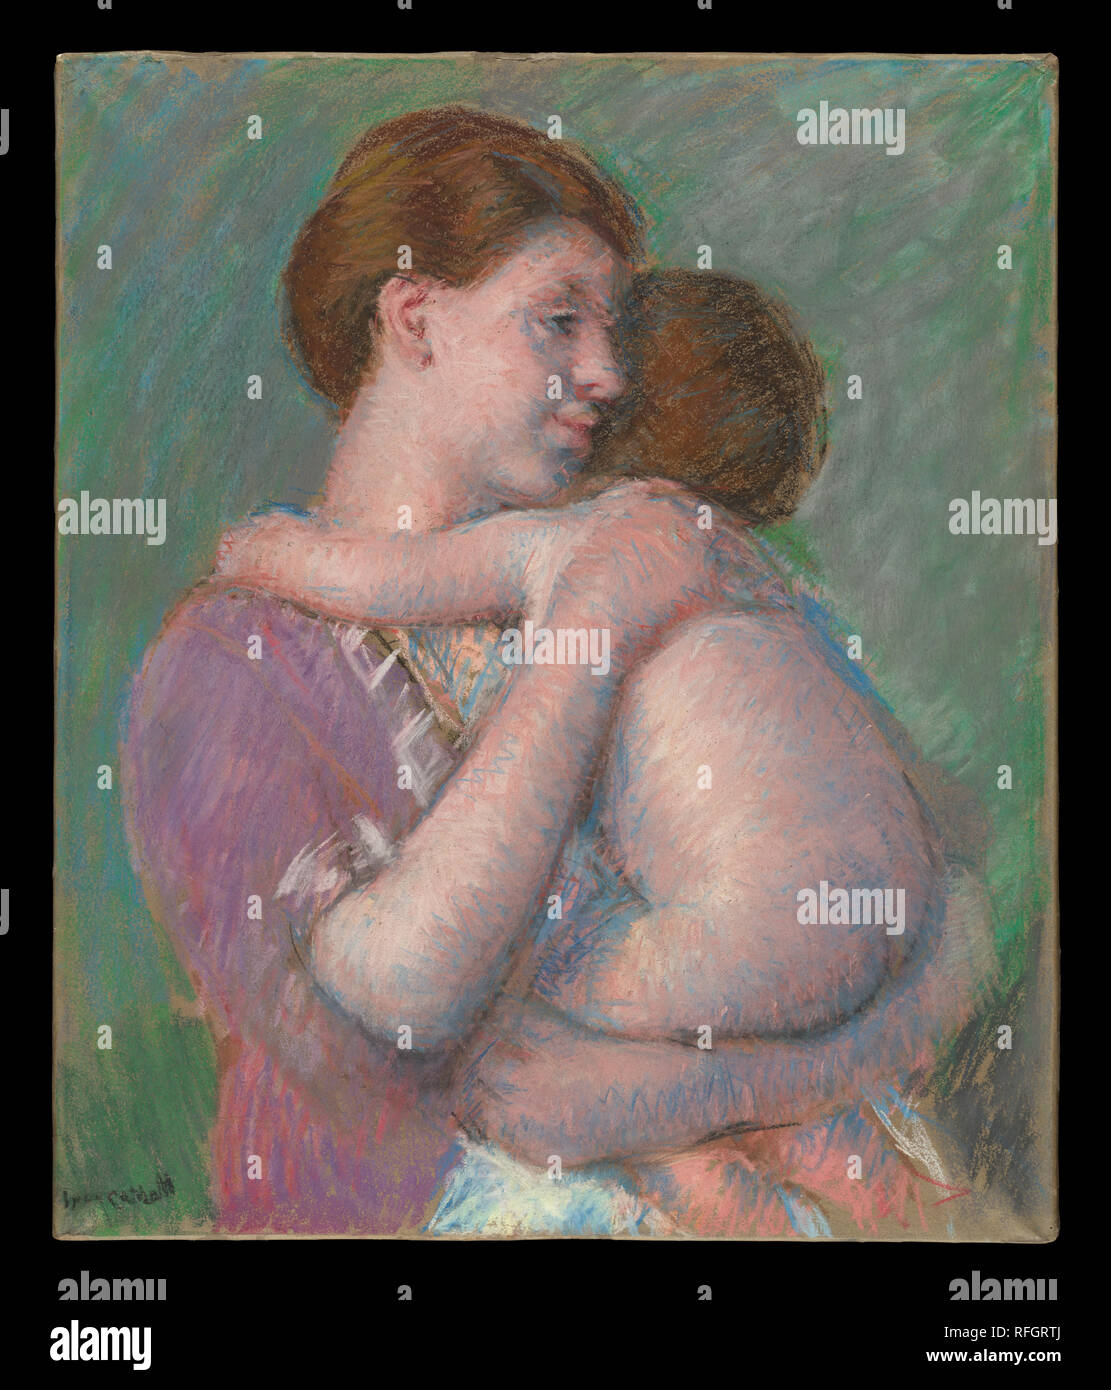 Mother and Child. Artist: Mary Cassatt (American, Pittsburgh, Pennsylvania 1844-1926 Le Mesnil-Théribus, Oise). Dimensions: 26 5/8 x 22 1/2 in. (67.6 x 57.2 cm). Date: 1914. Museum: Metropolitan Museum of Art, New York, USA. Stock Photo